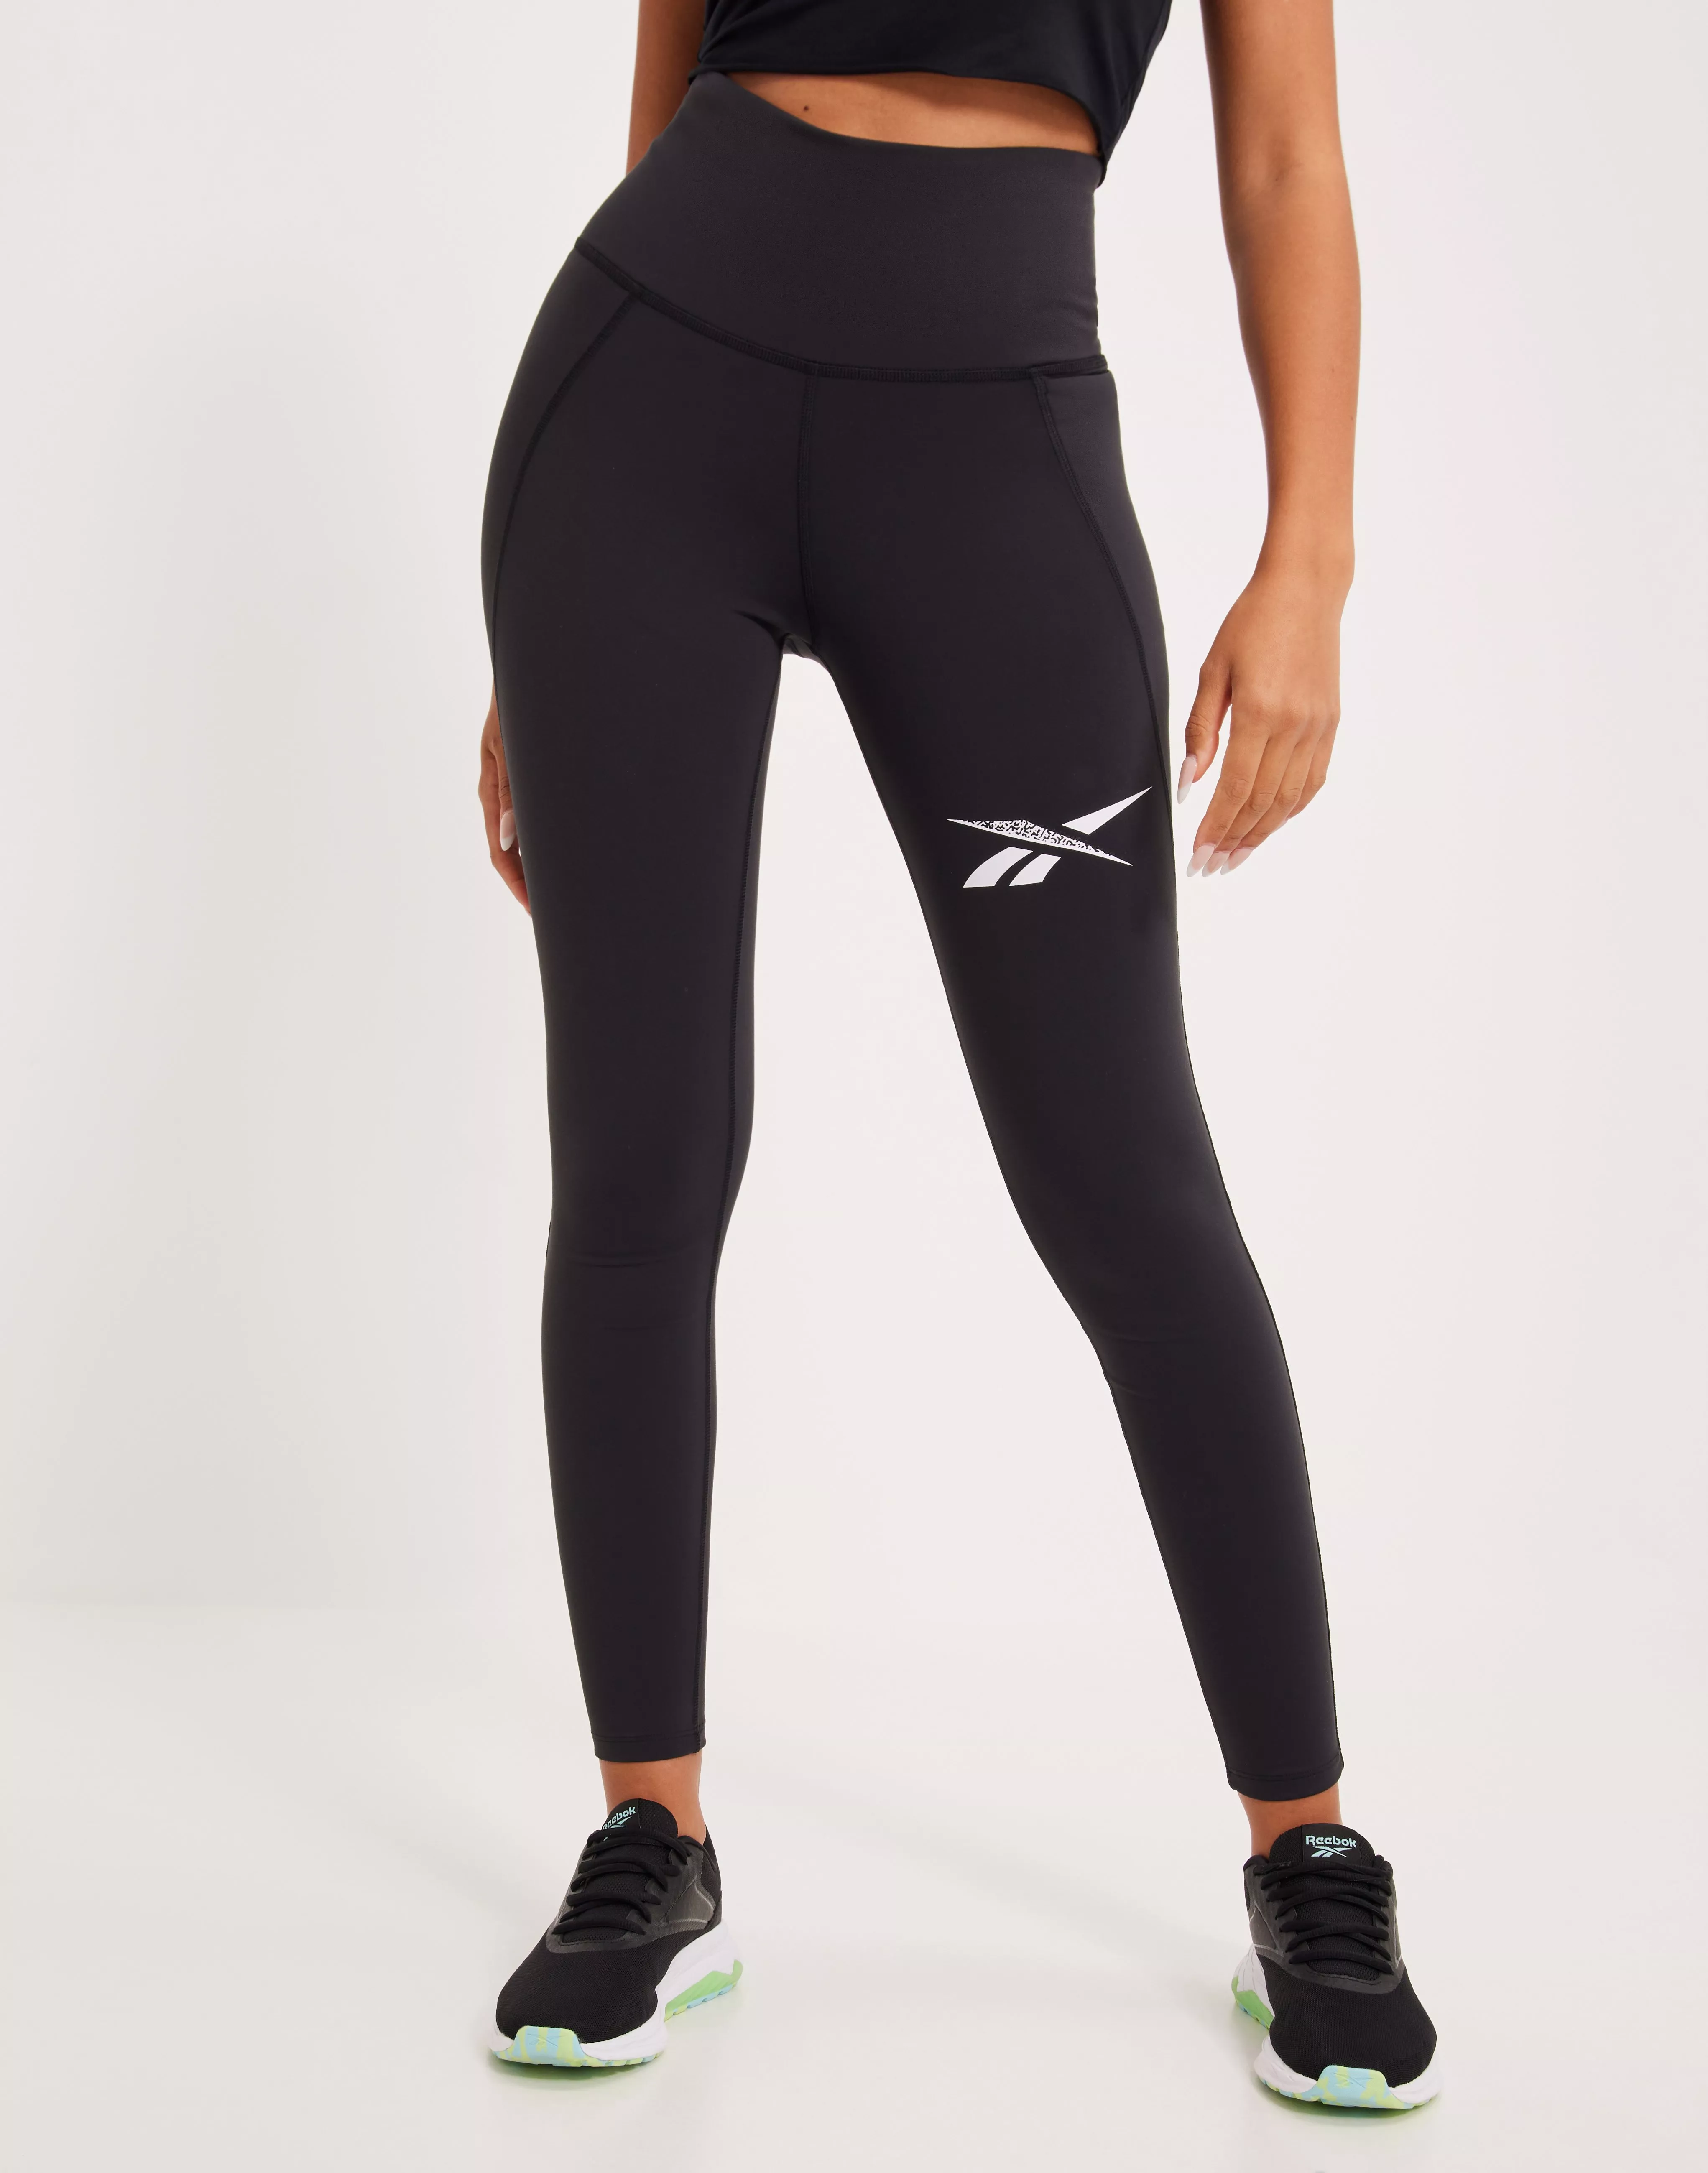 TS LUX HR VECTOR TIGHT